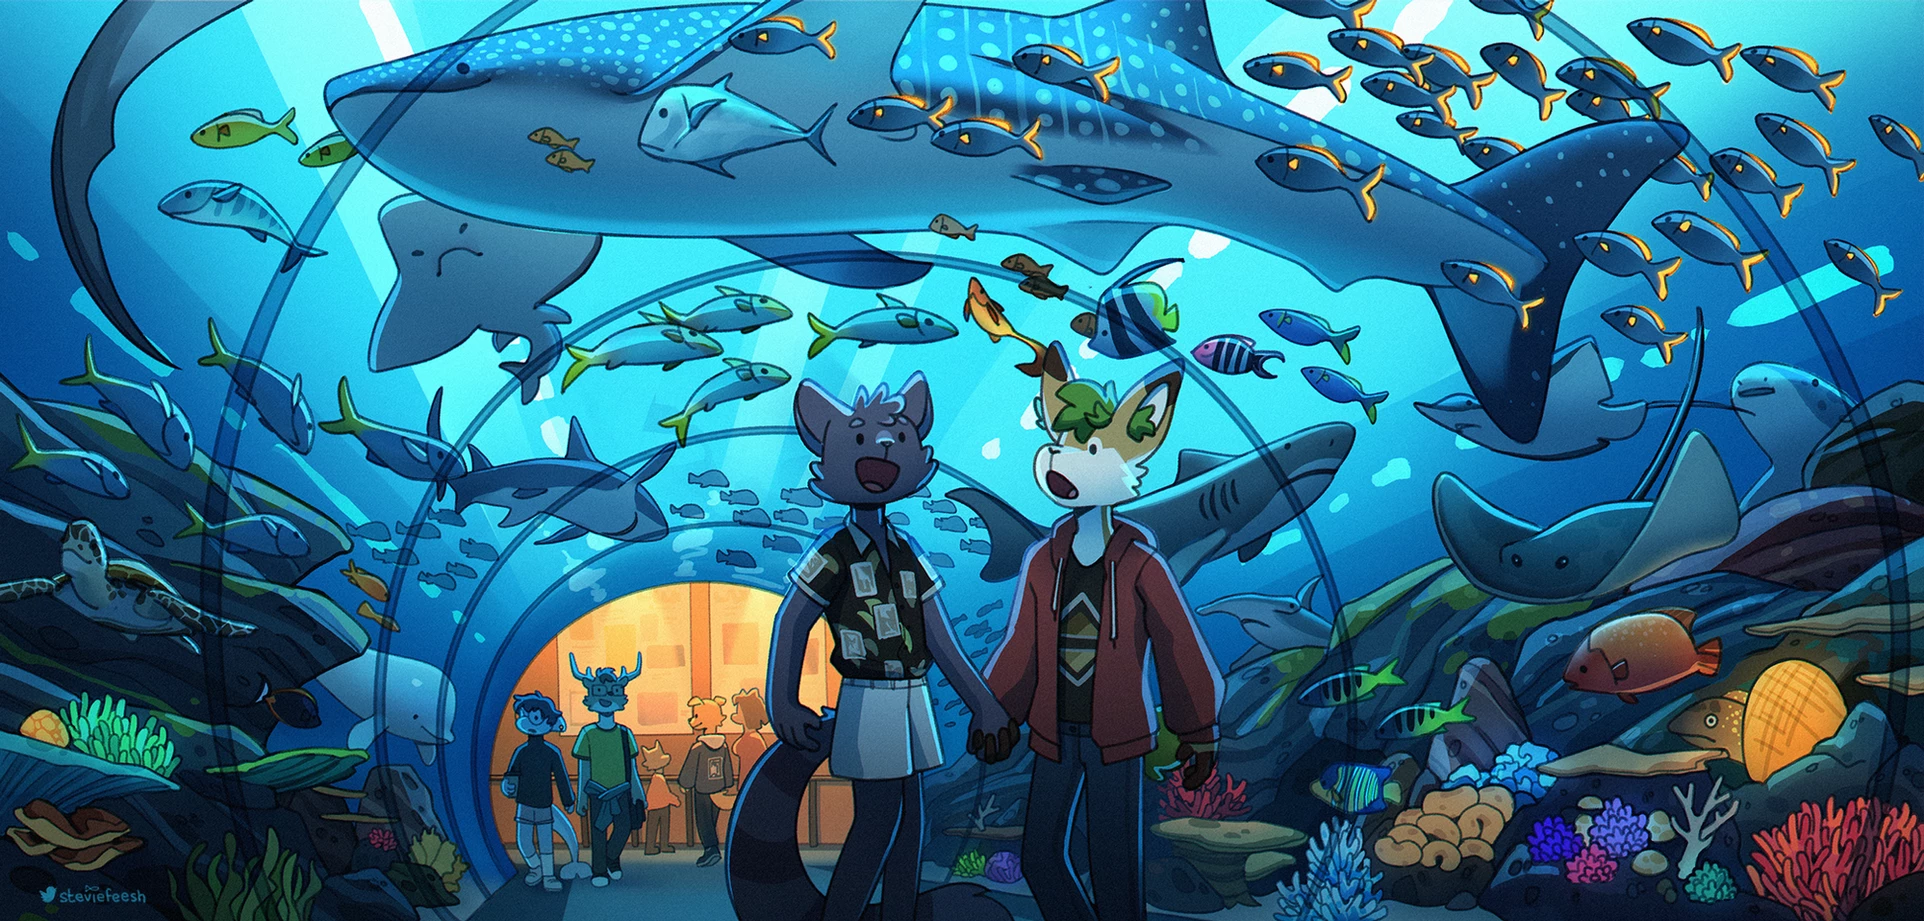 General 1924x921 steviefeesh aquarium water dolphin whale fish Fish Swarm coral Anthro turtle shark coral reef anthropomorphism